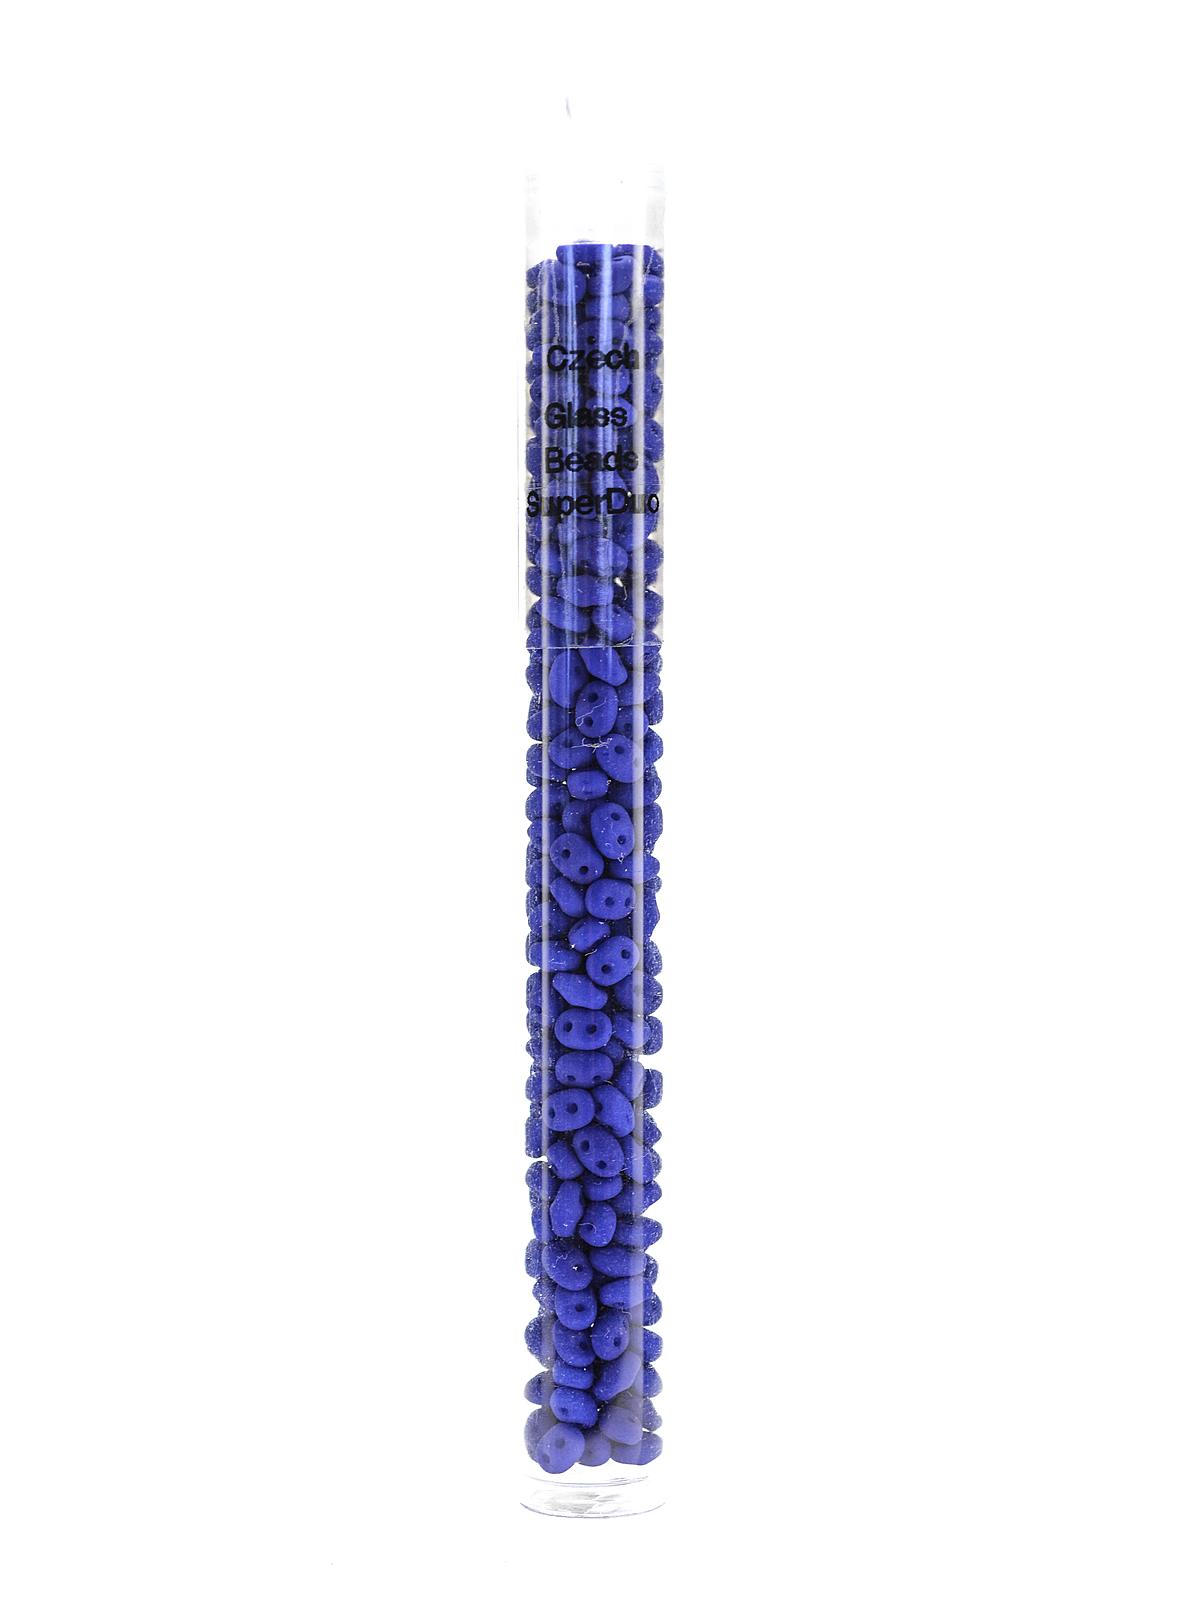 Super Duo Beads Neon Blue 2.5 Mm X 5 Mm 24 Gm Tube